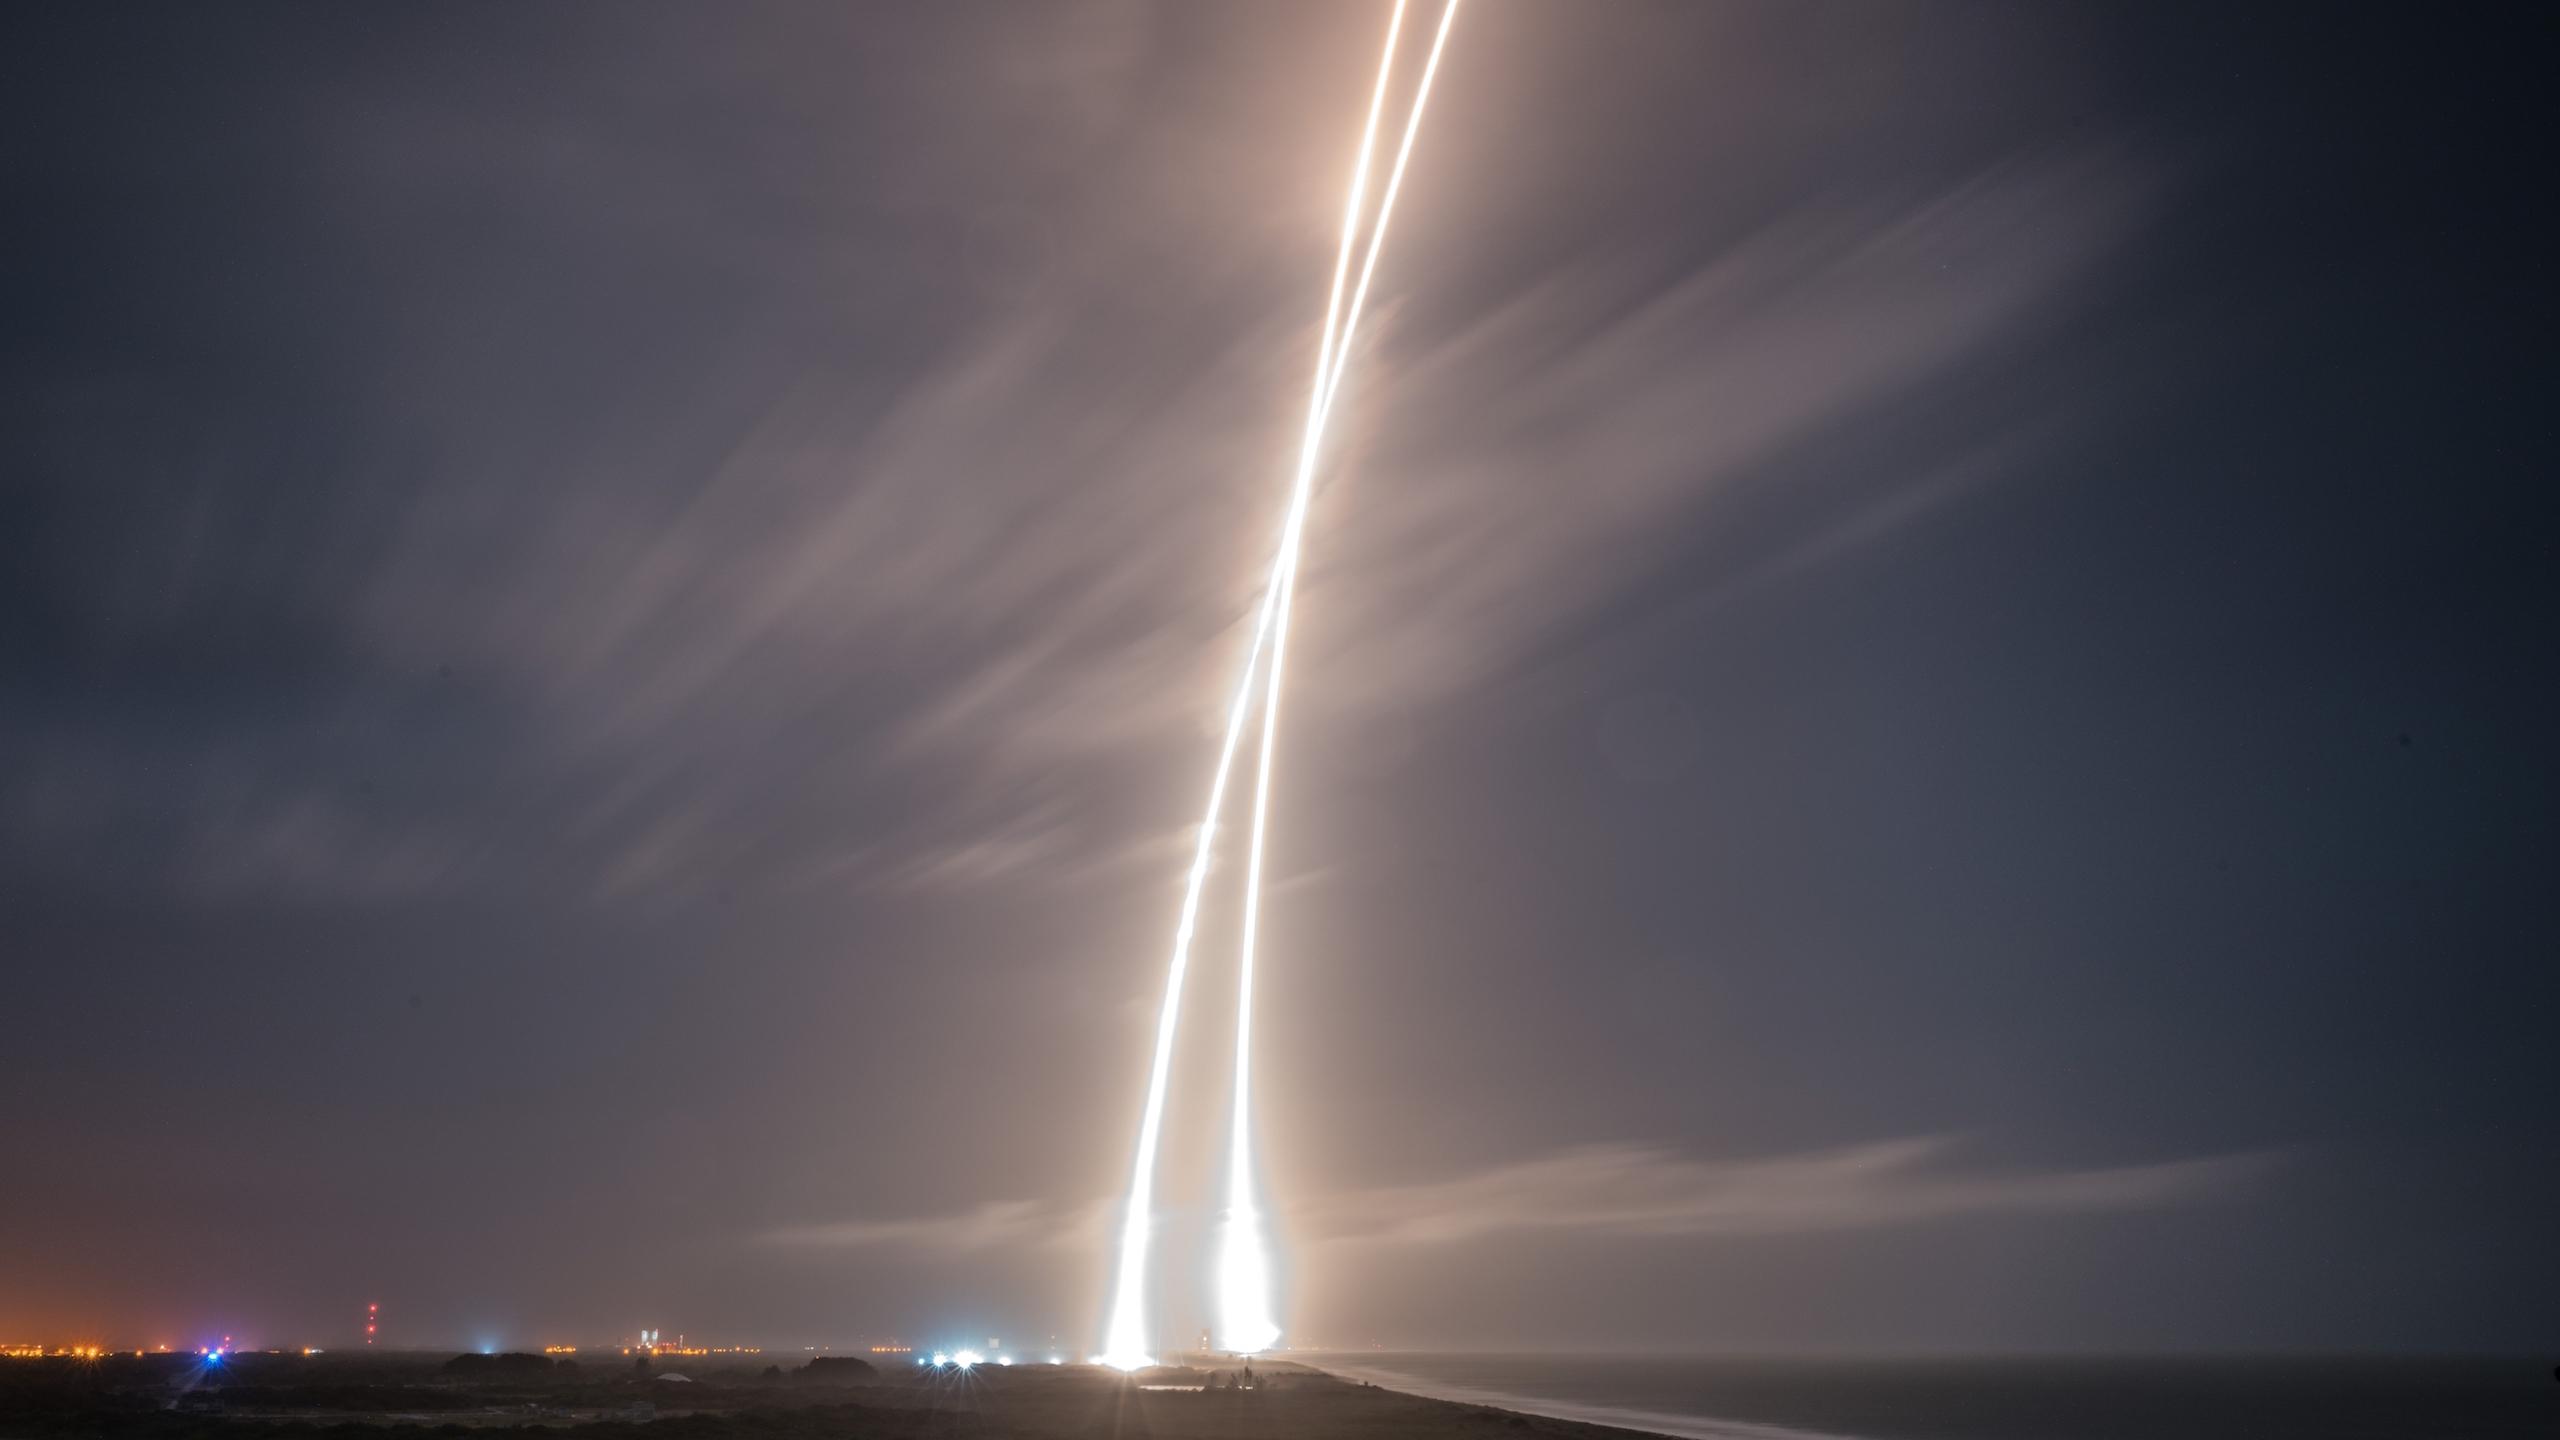 SpaceX's launch and landing of Falcon9 rocket [2560x1440] 1080p